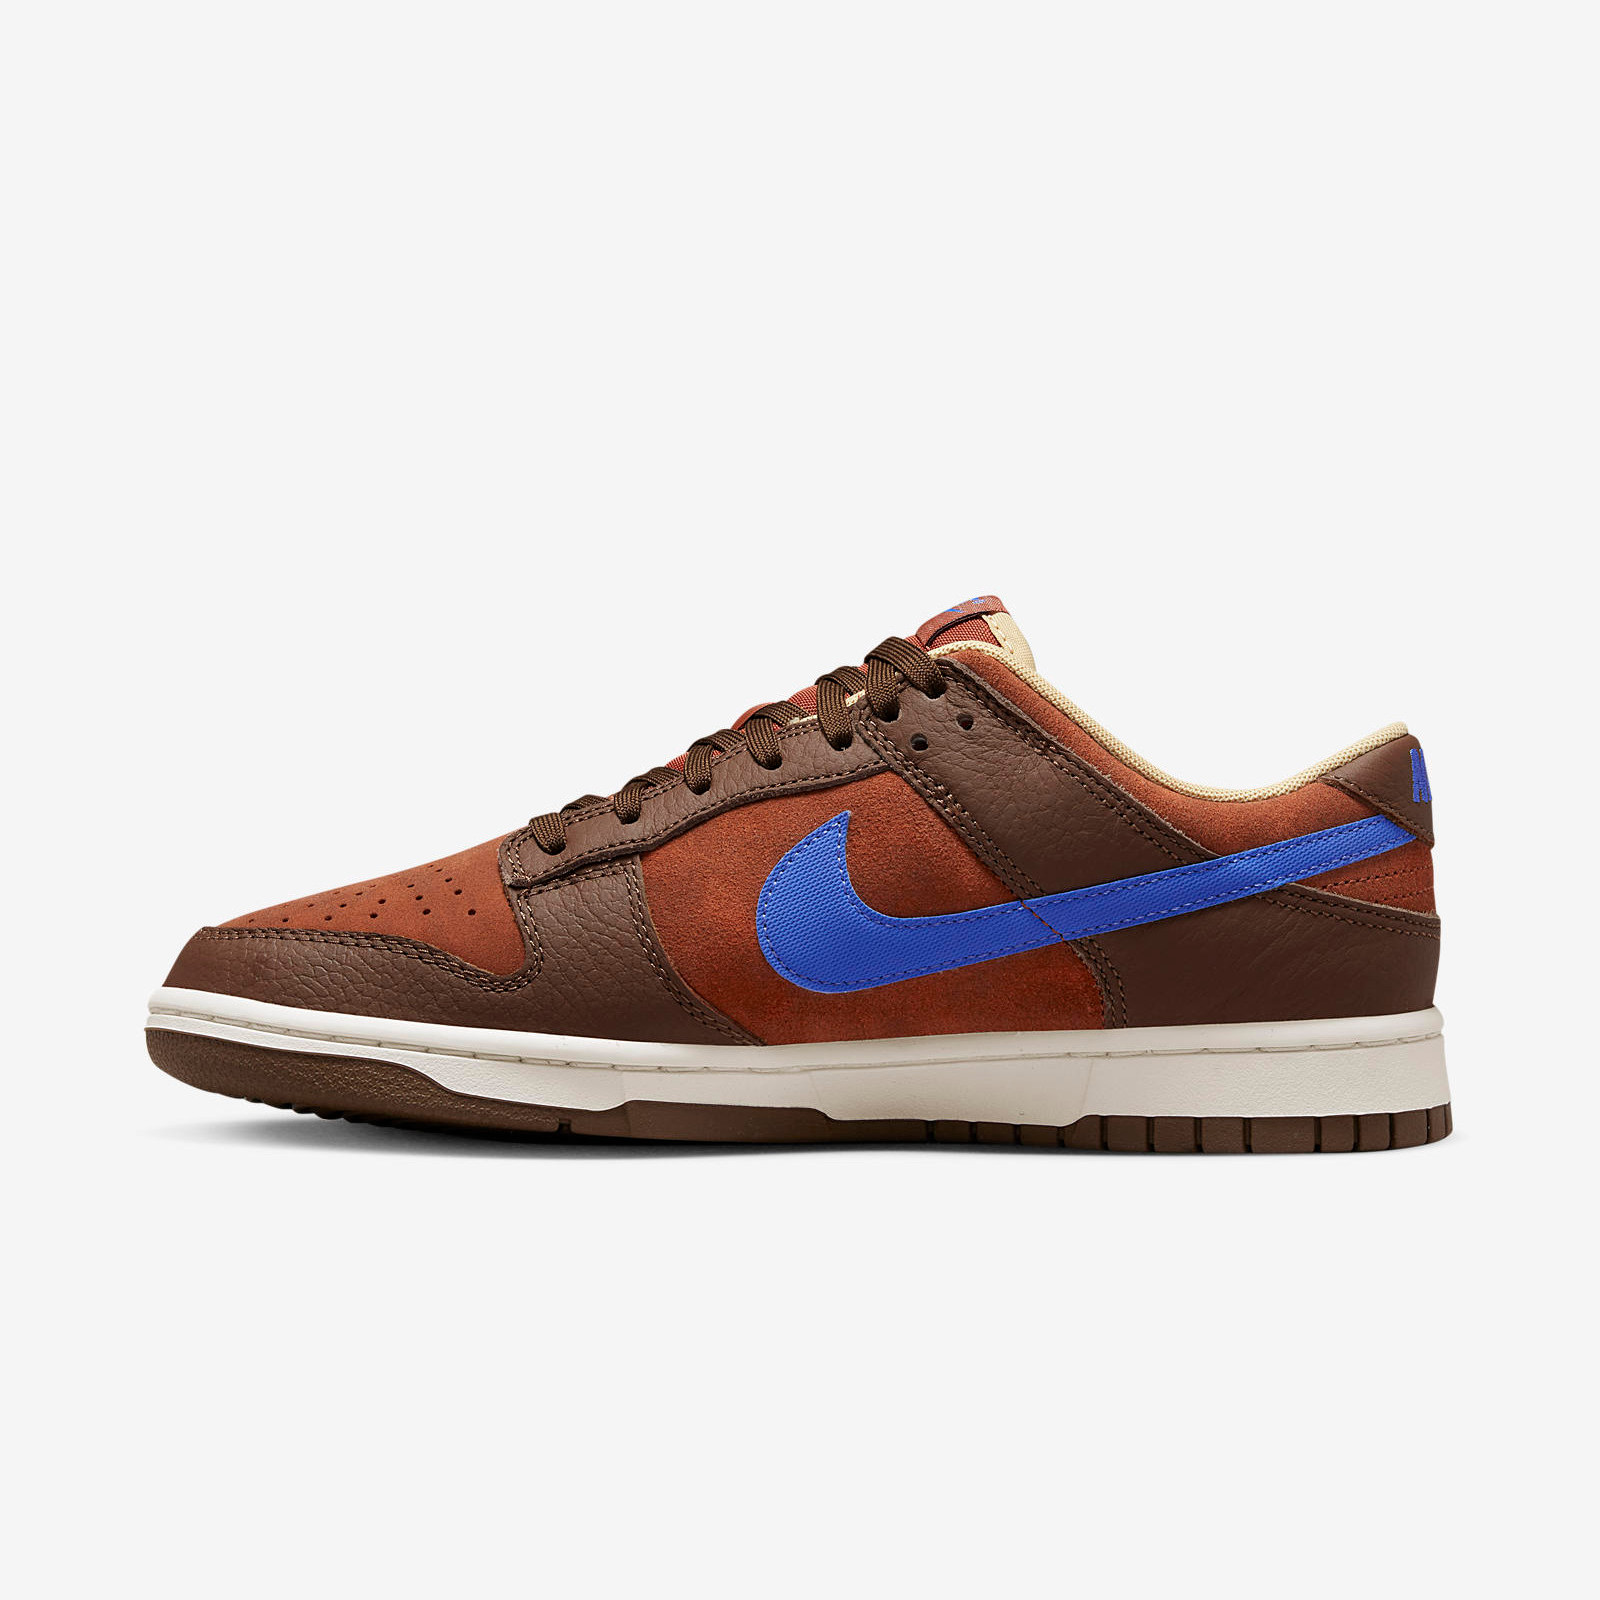 Nike Dunk Low
Cacao / Blue